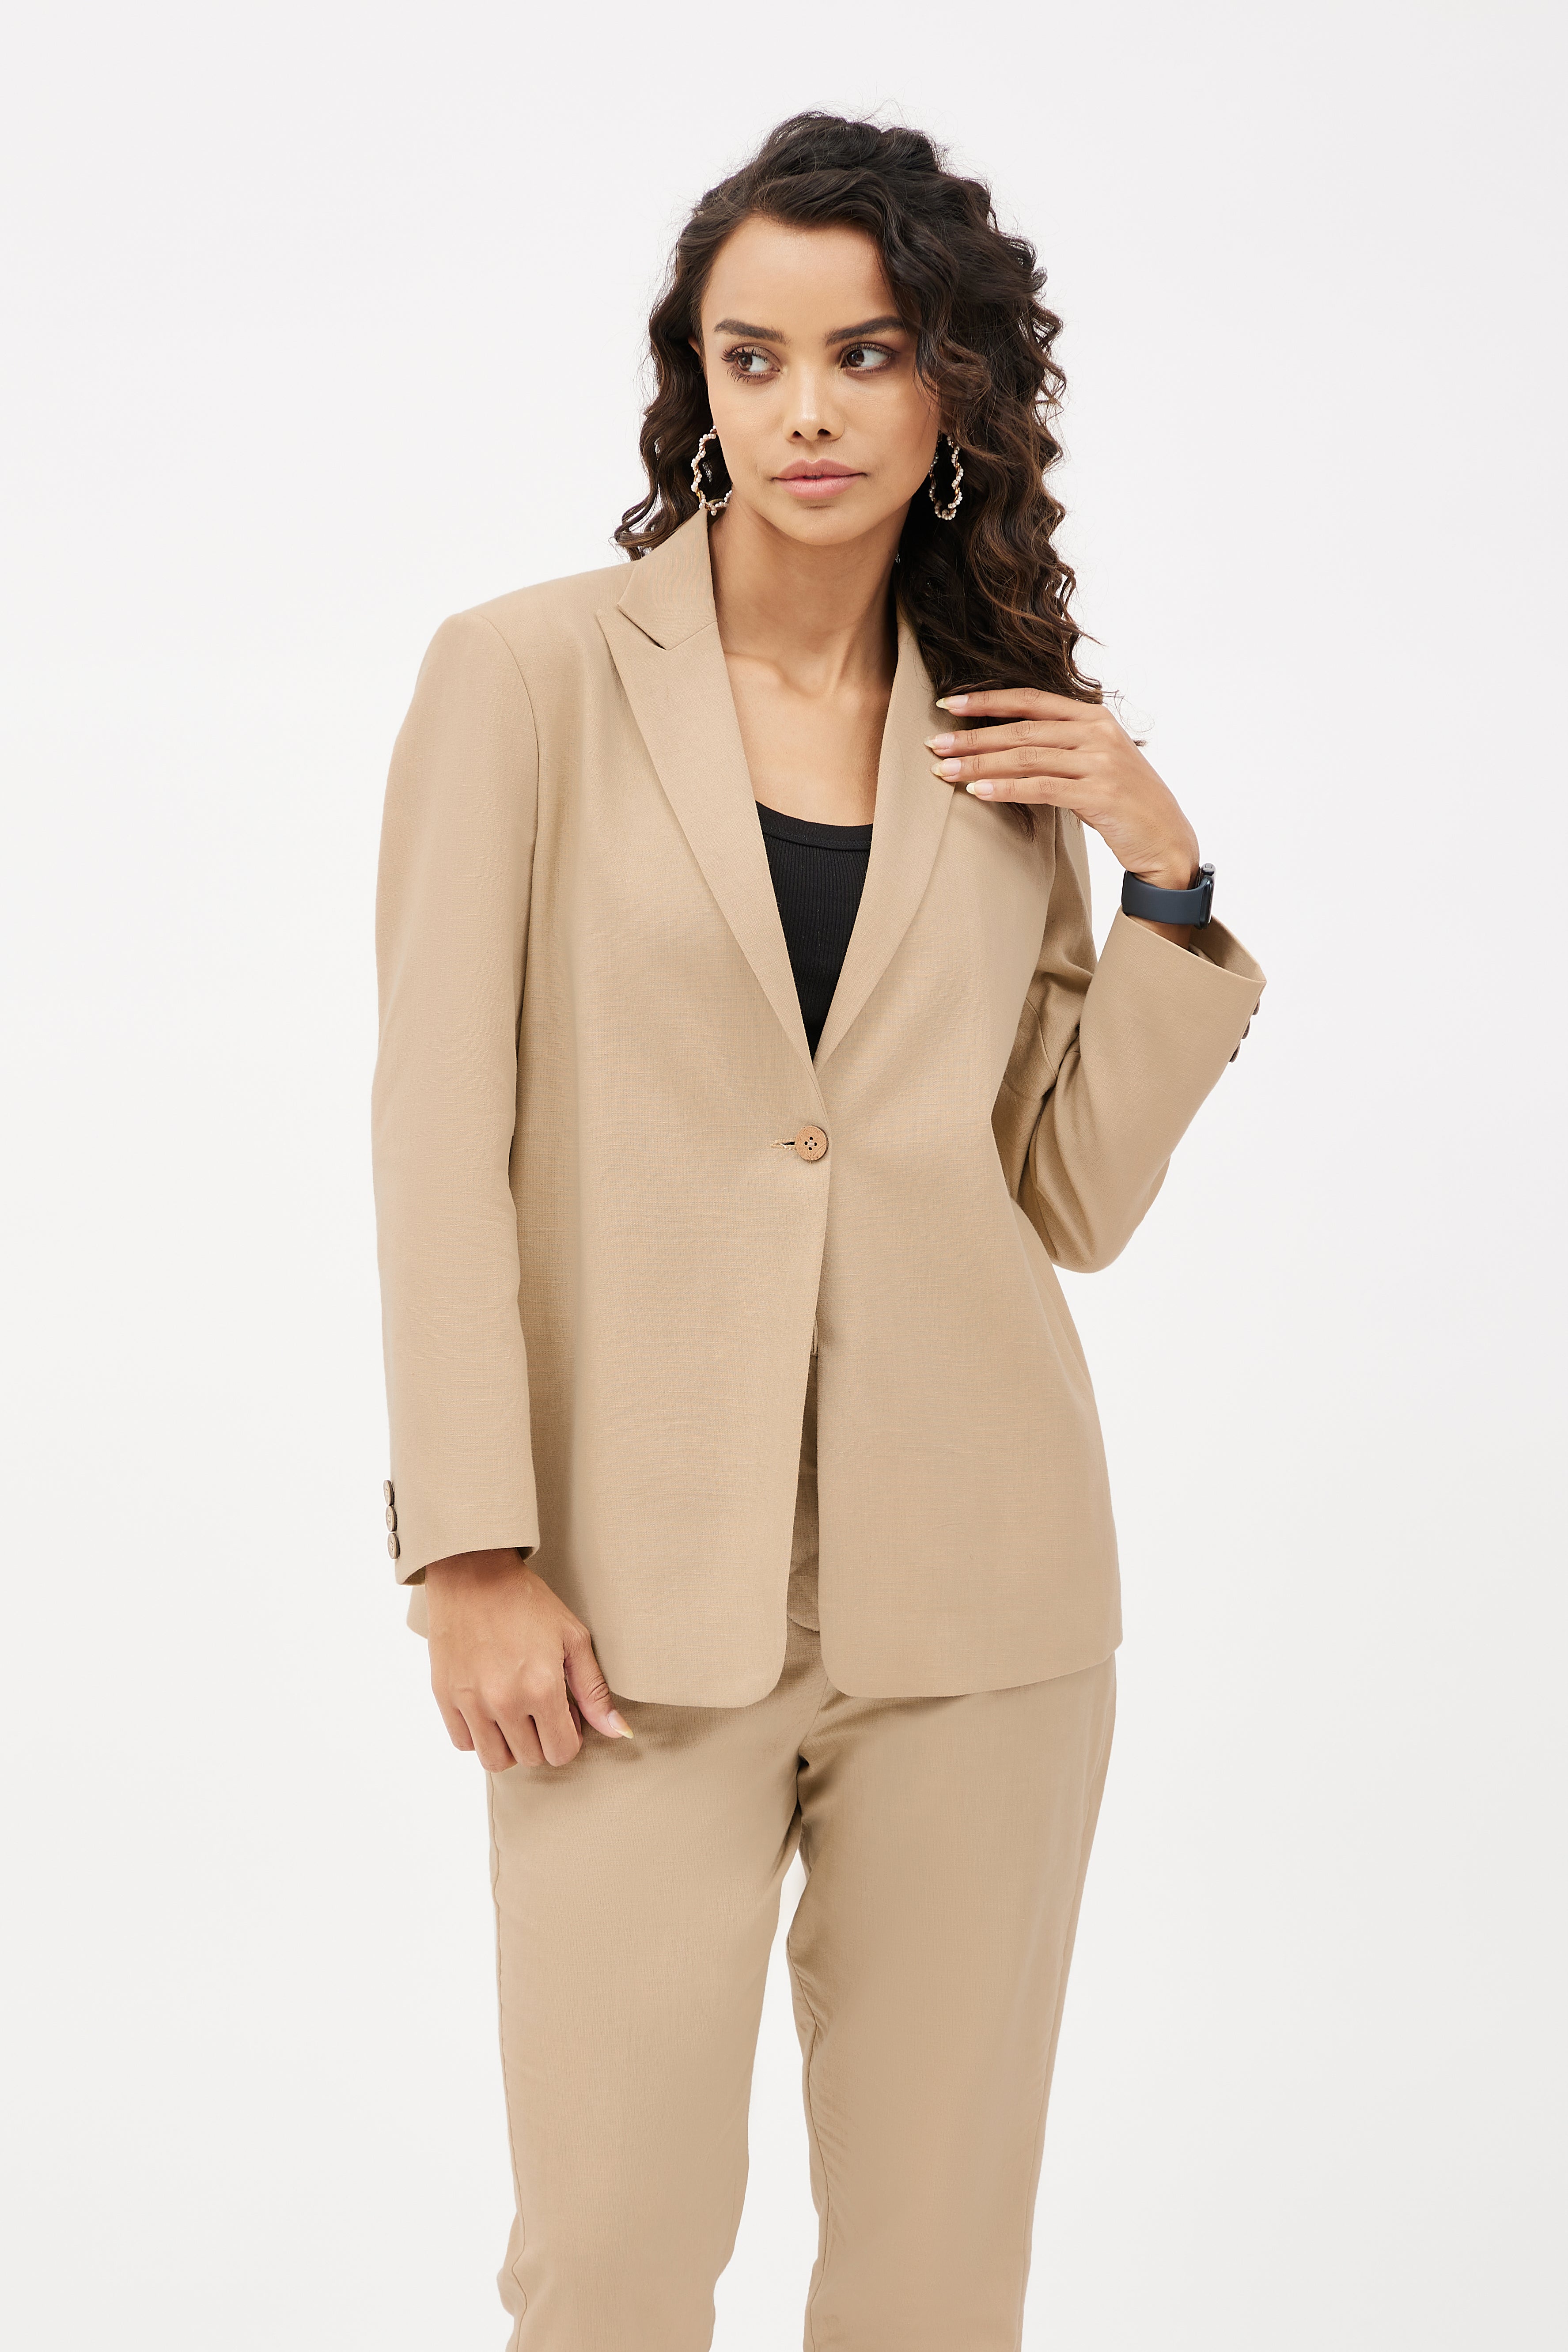 Satin printed Women's Suit with blazer and straight pants – The Ambition  Collective